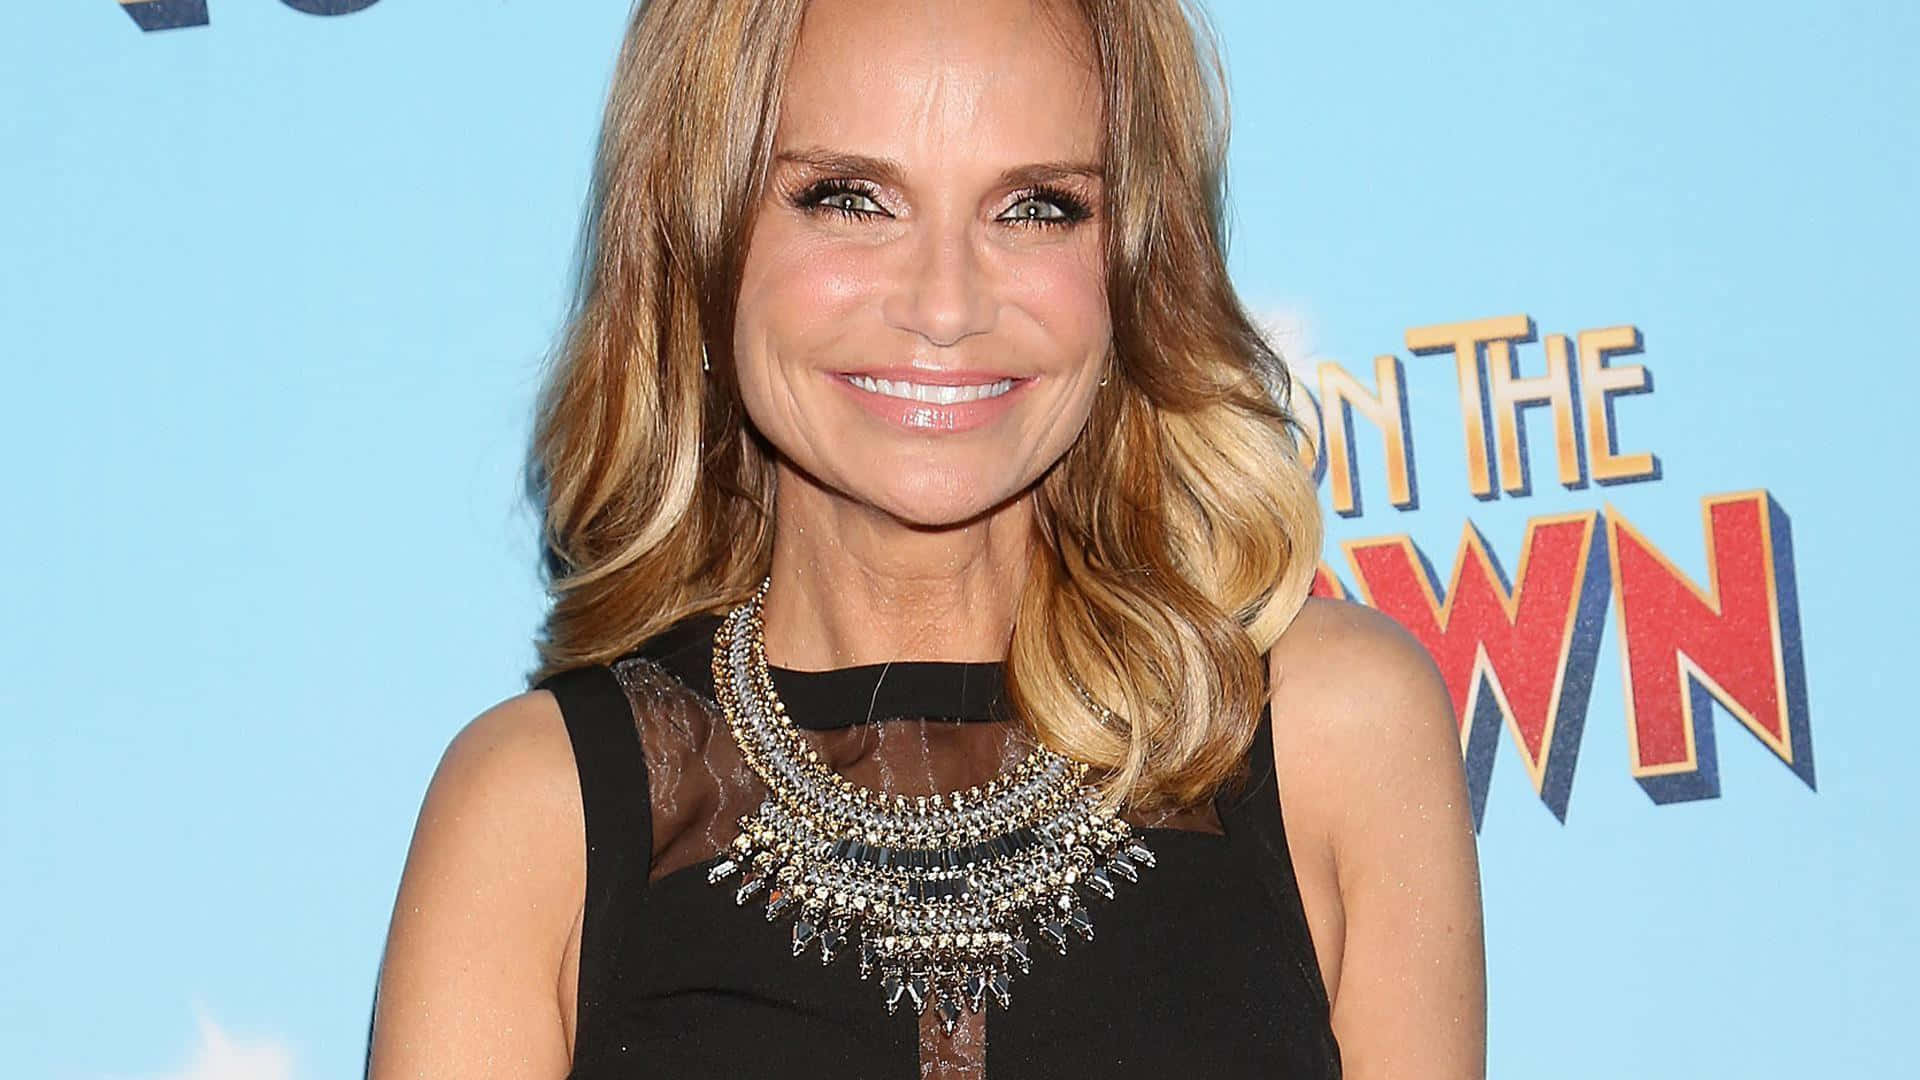 Captivating Kristin Chenoweth Smiling and Sparkling on Red Carpet Wallpaper